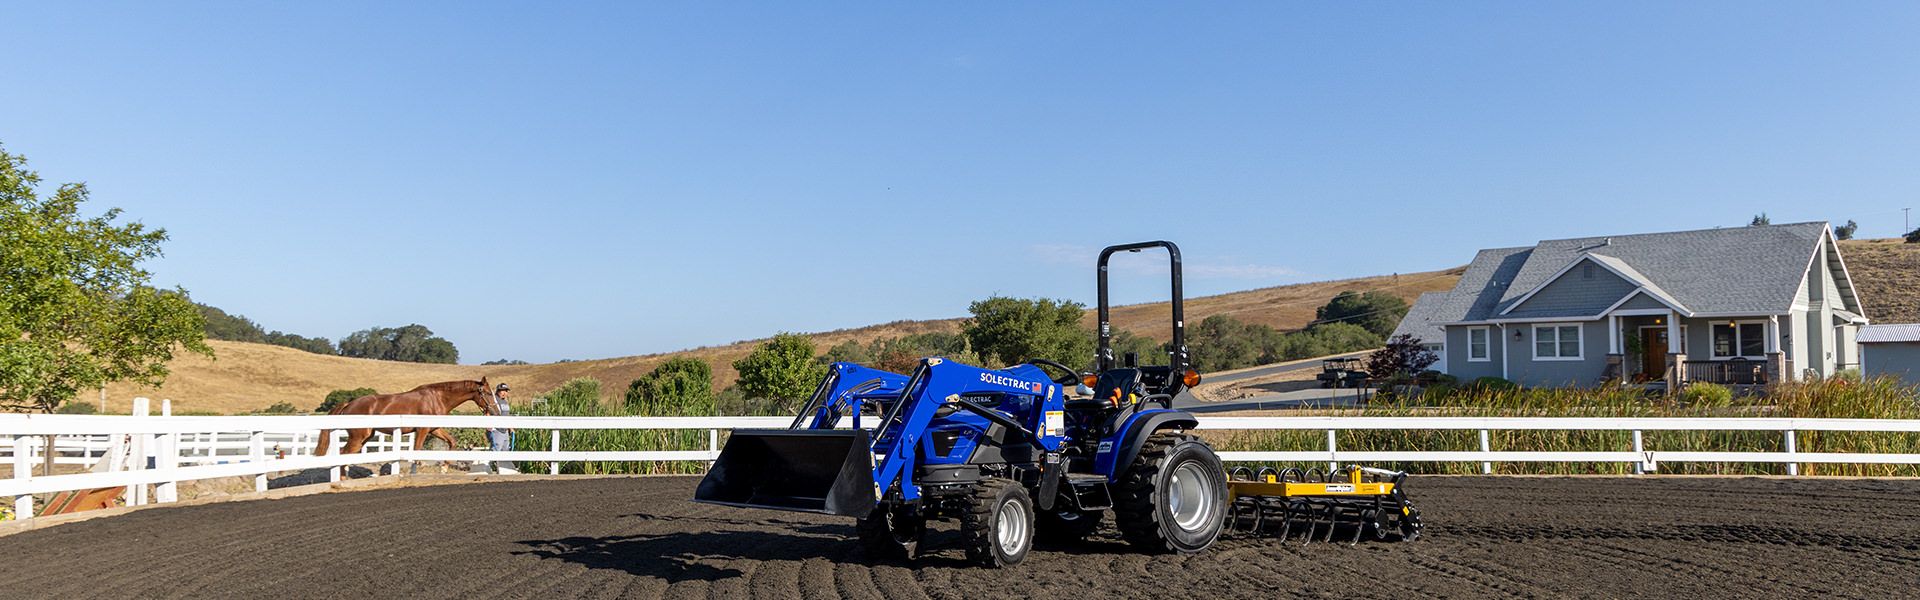 Solectrac-e25-electric-tractor-horse arena